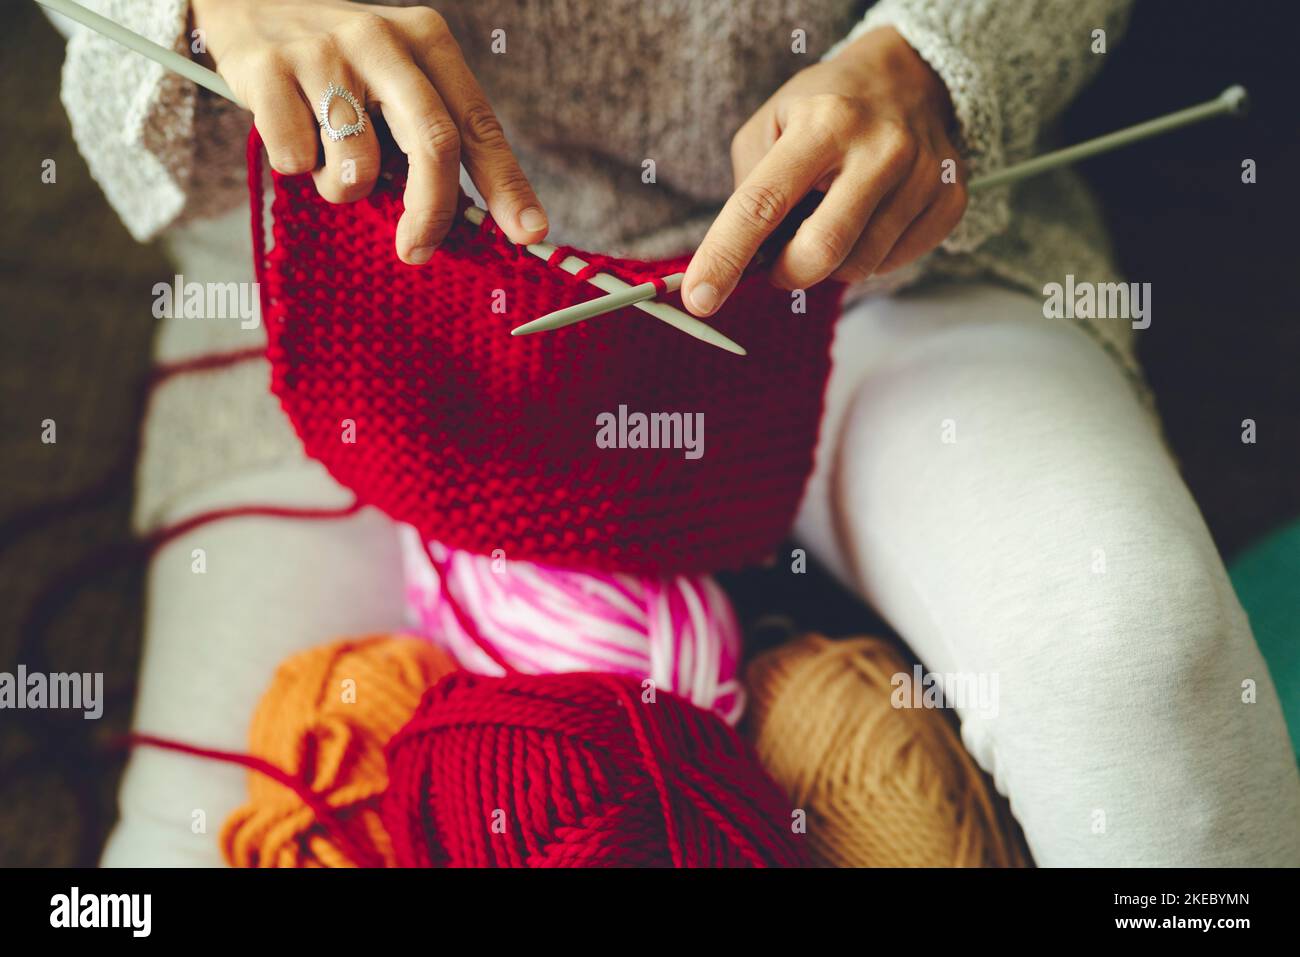 Close up view of fmale hands doing knit work with red wool. Handmade and hand craft clothes production in indoor hobby leisure activity. Woman working with knitting needles. Diy winter activity indoor Stock Photo